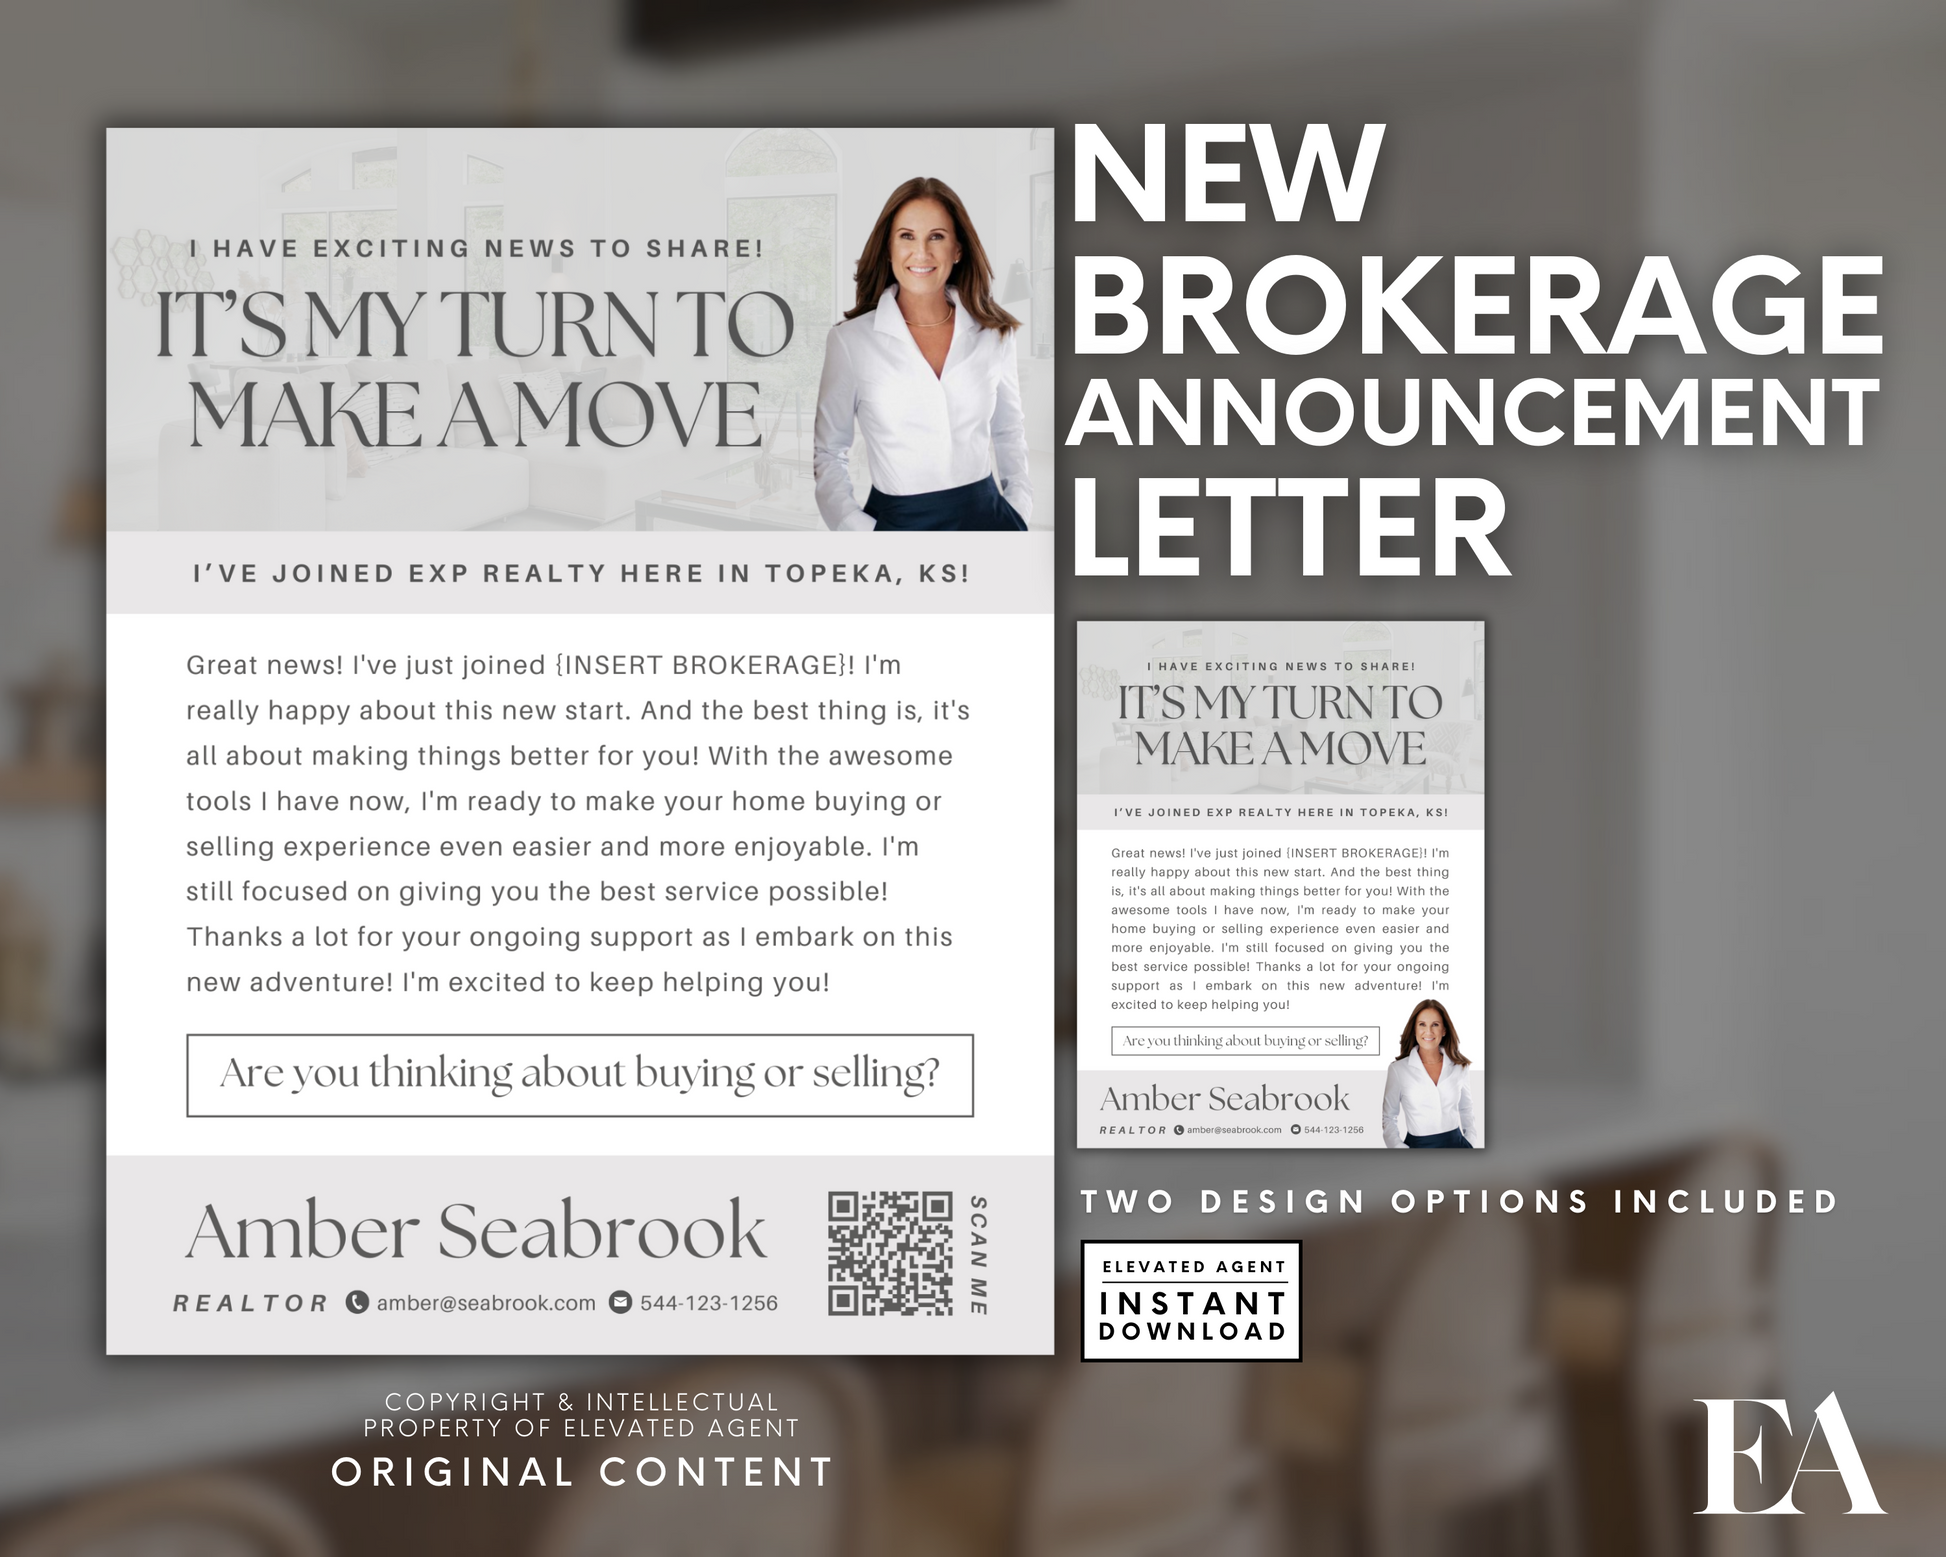 New Brokerage Announcement Letter, Real Estate Broker, Realtor Marketing, Real Estate Template, Realtor Flyer, Real Estate Investment, Canva